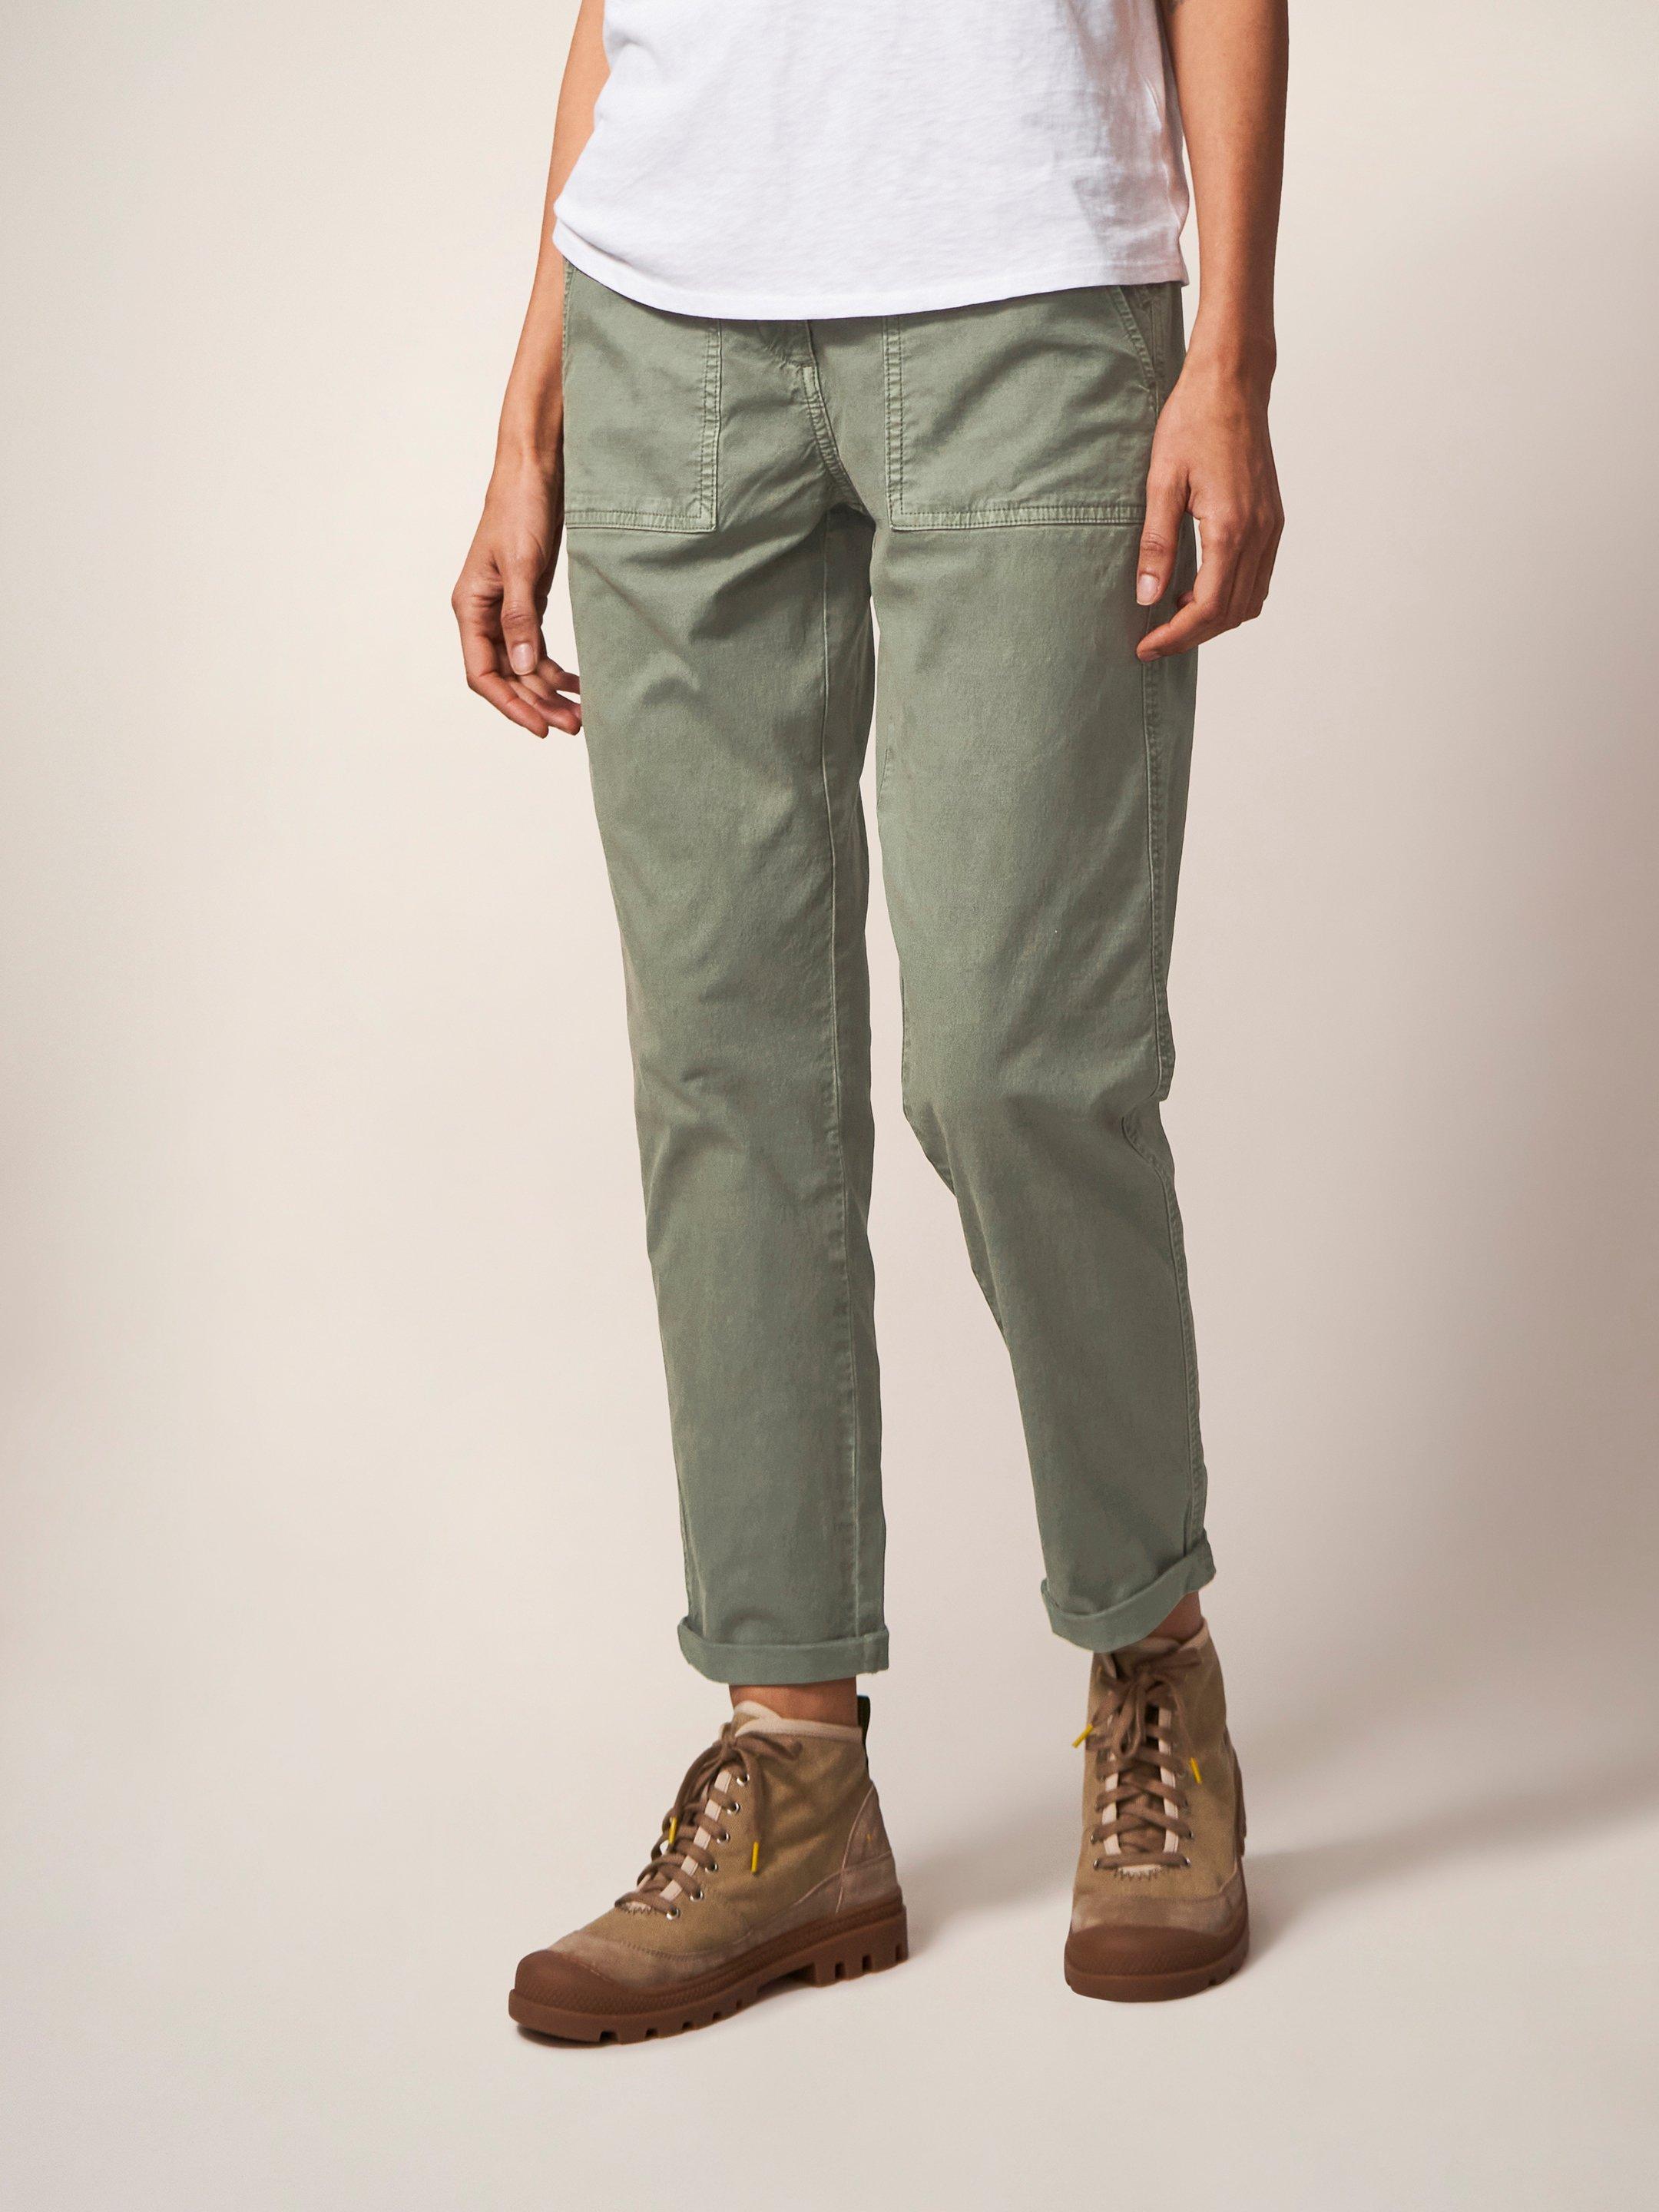 Twister Chino in MID GREEN - LIFESTYLE